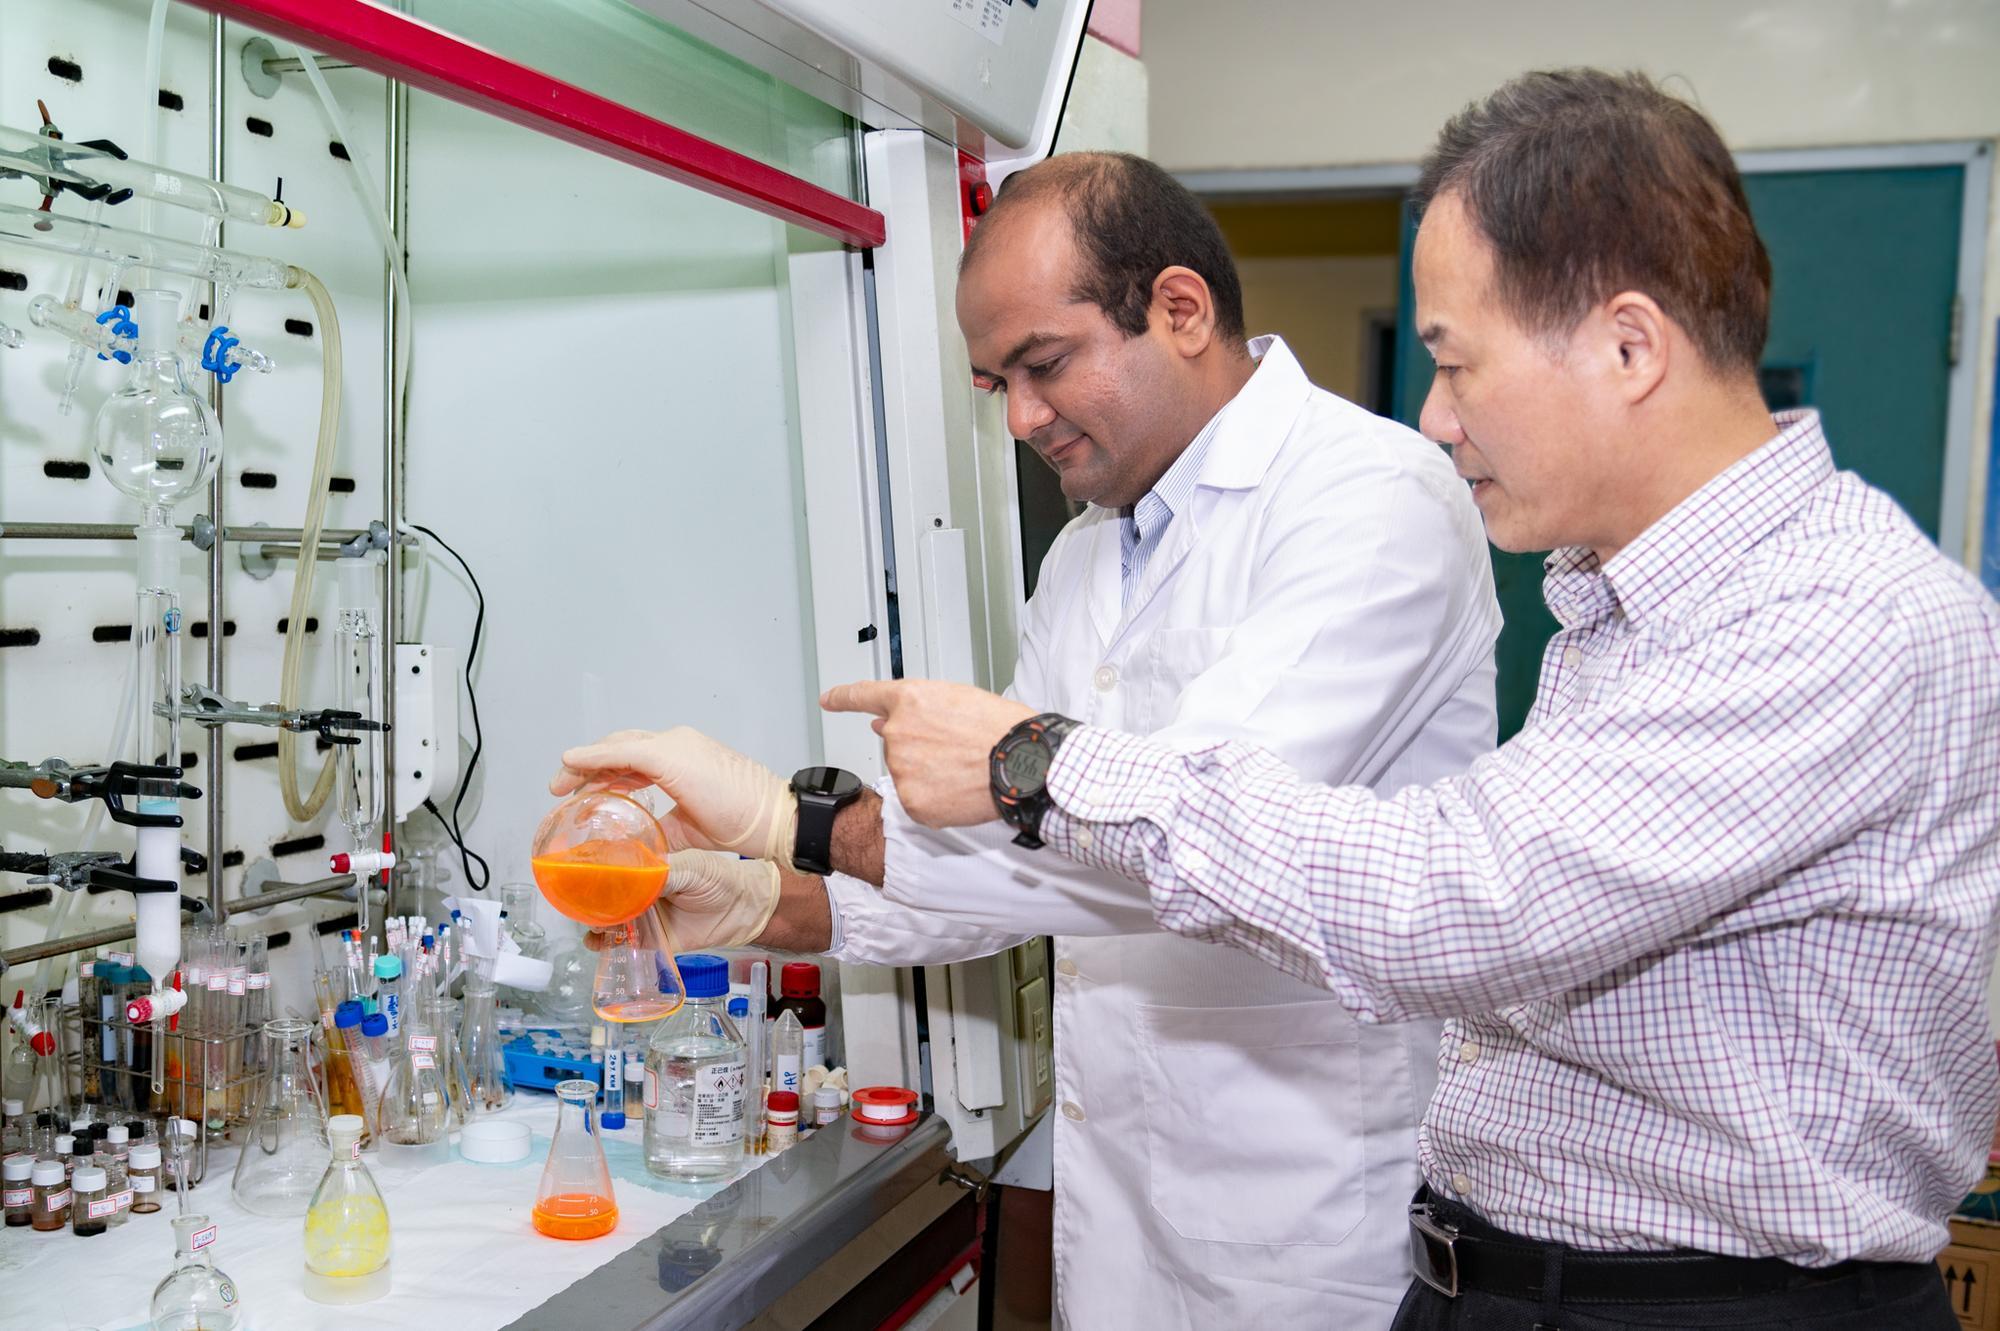 NTHU Distinguished professor Kuo Chu Hwang (黃國柱) (right) and postdoctoral researcher Vaibhav Pramod Charpe employ photochemical reactions to degrade persistent organic pollutants (POPs).